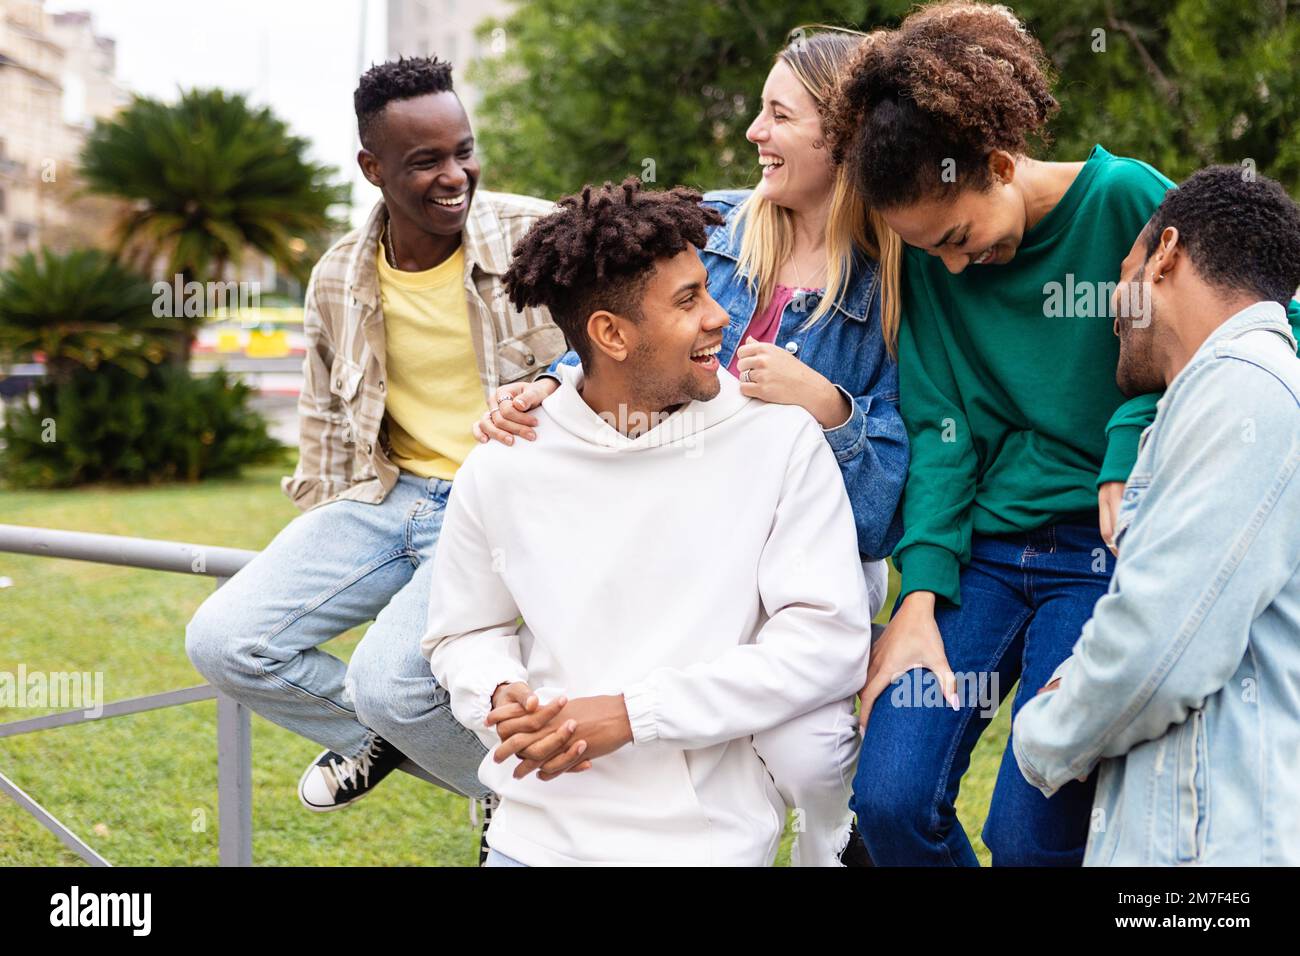 Happy multiethnic group of young friends having fun together outdoor Stock Photo